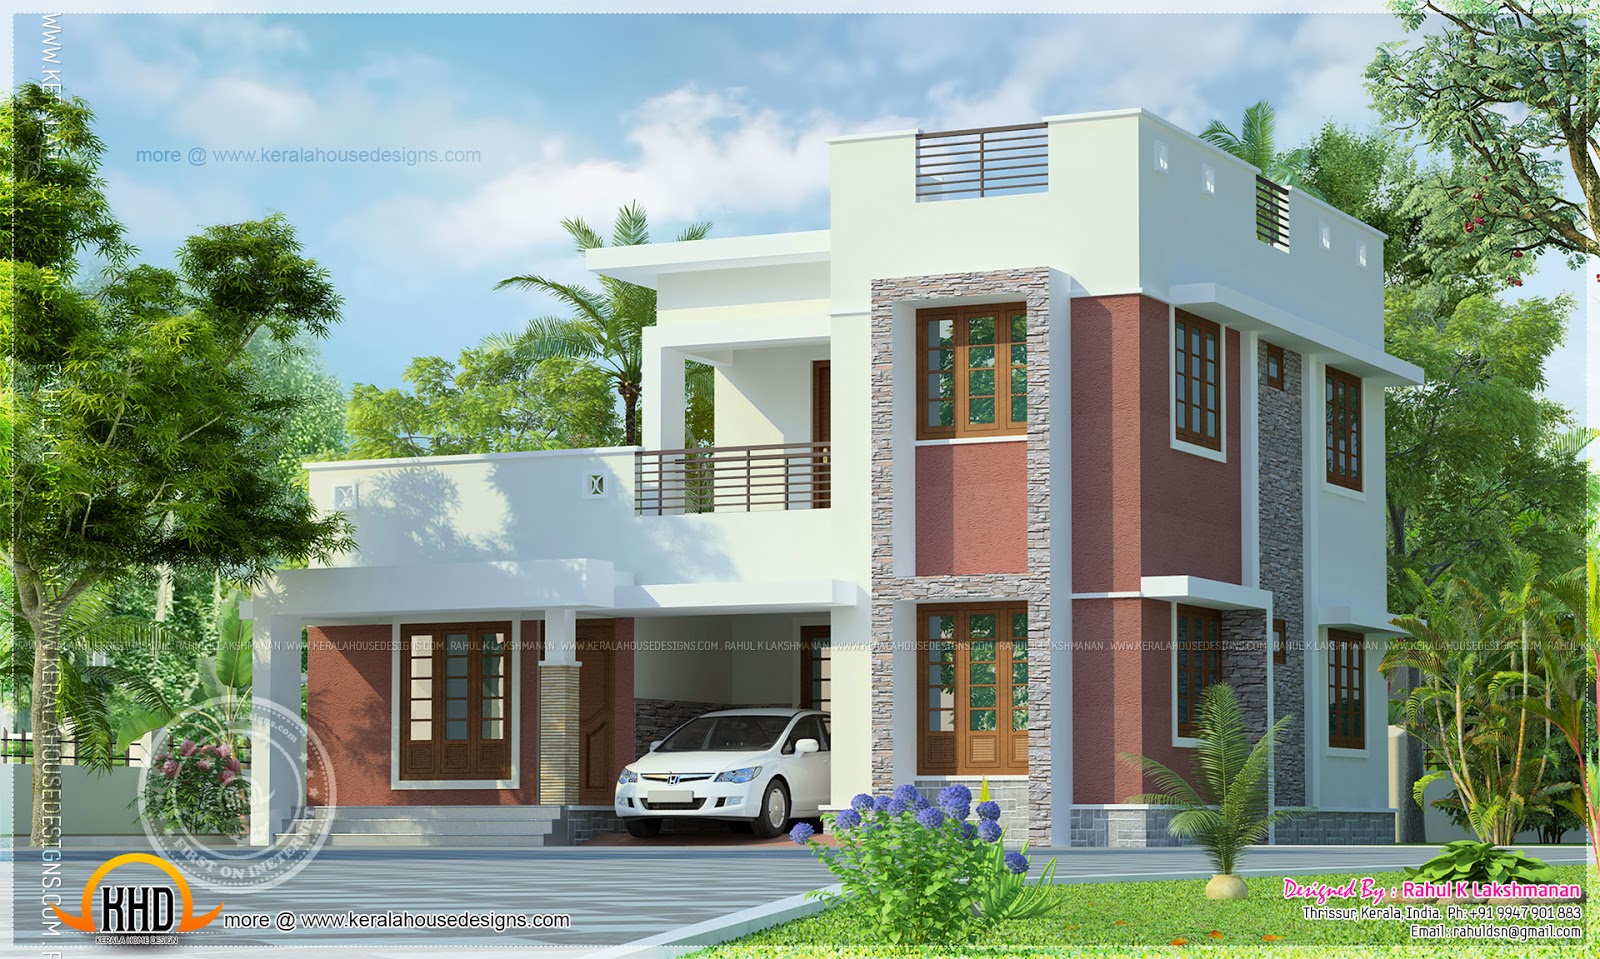  Simple  flat roof house  exterior  Kerala home  design  and 